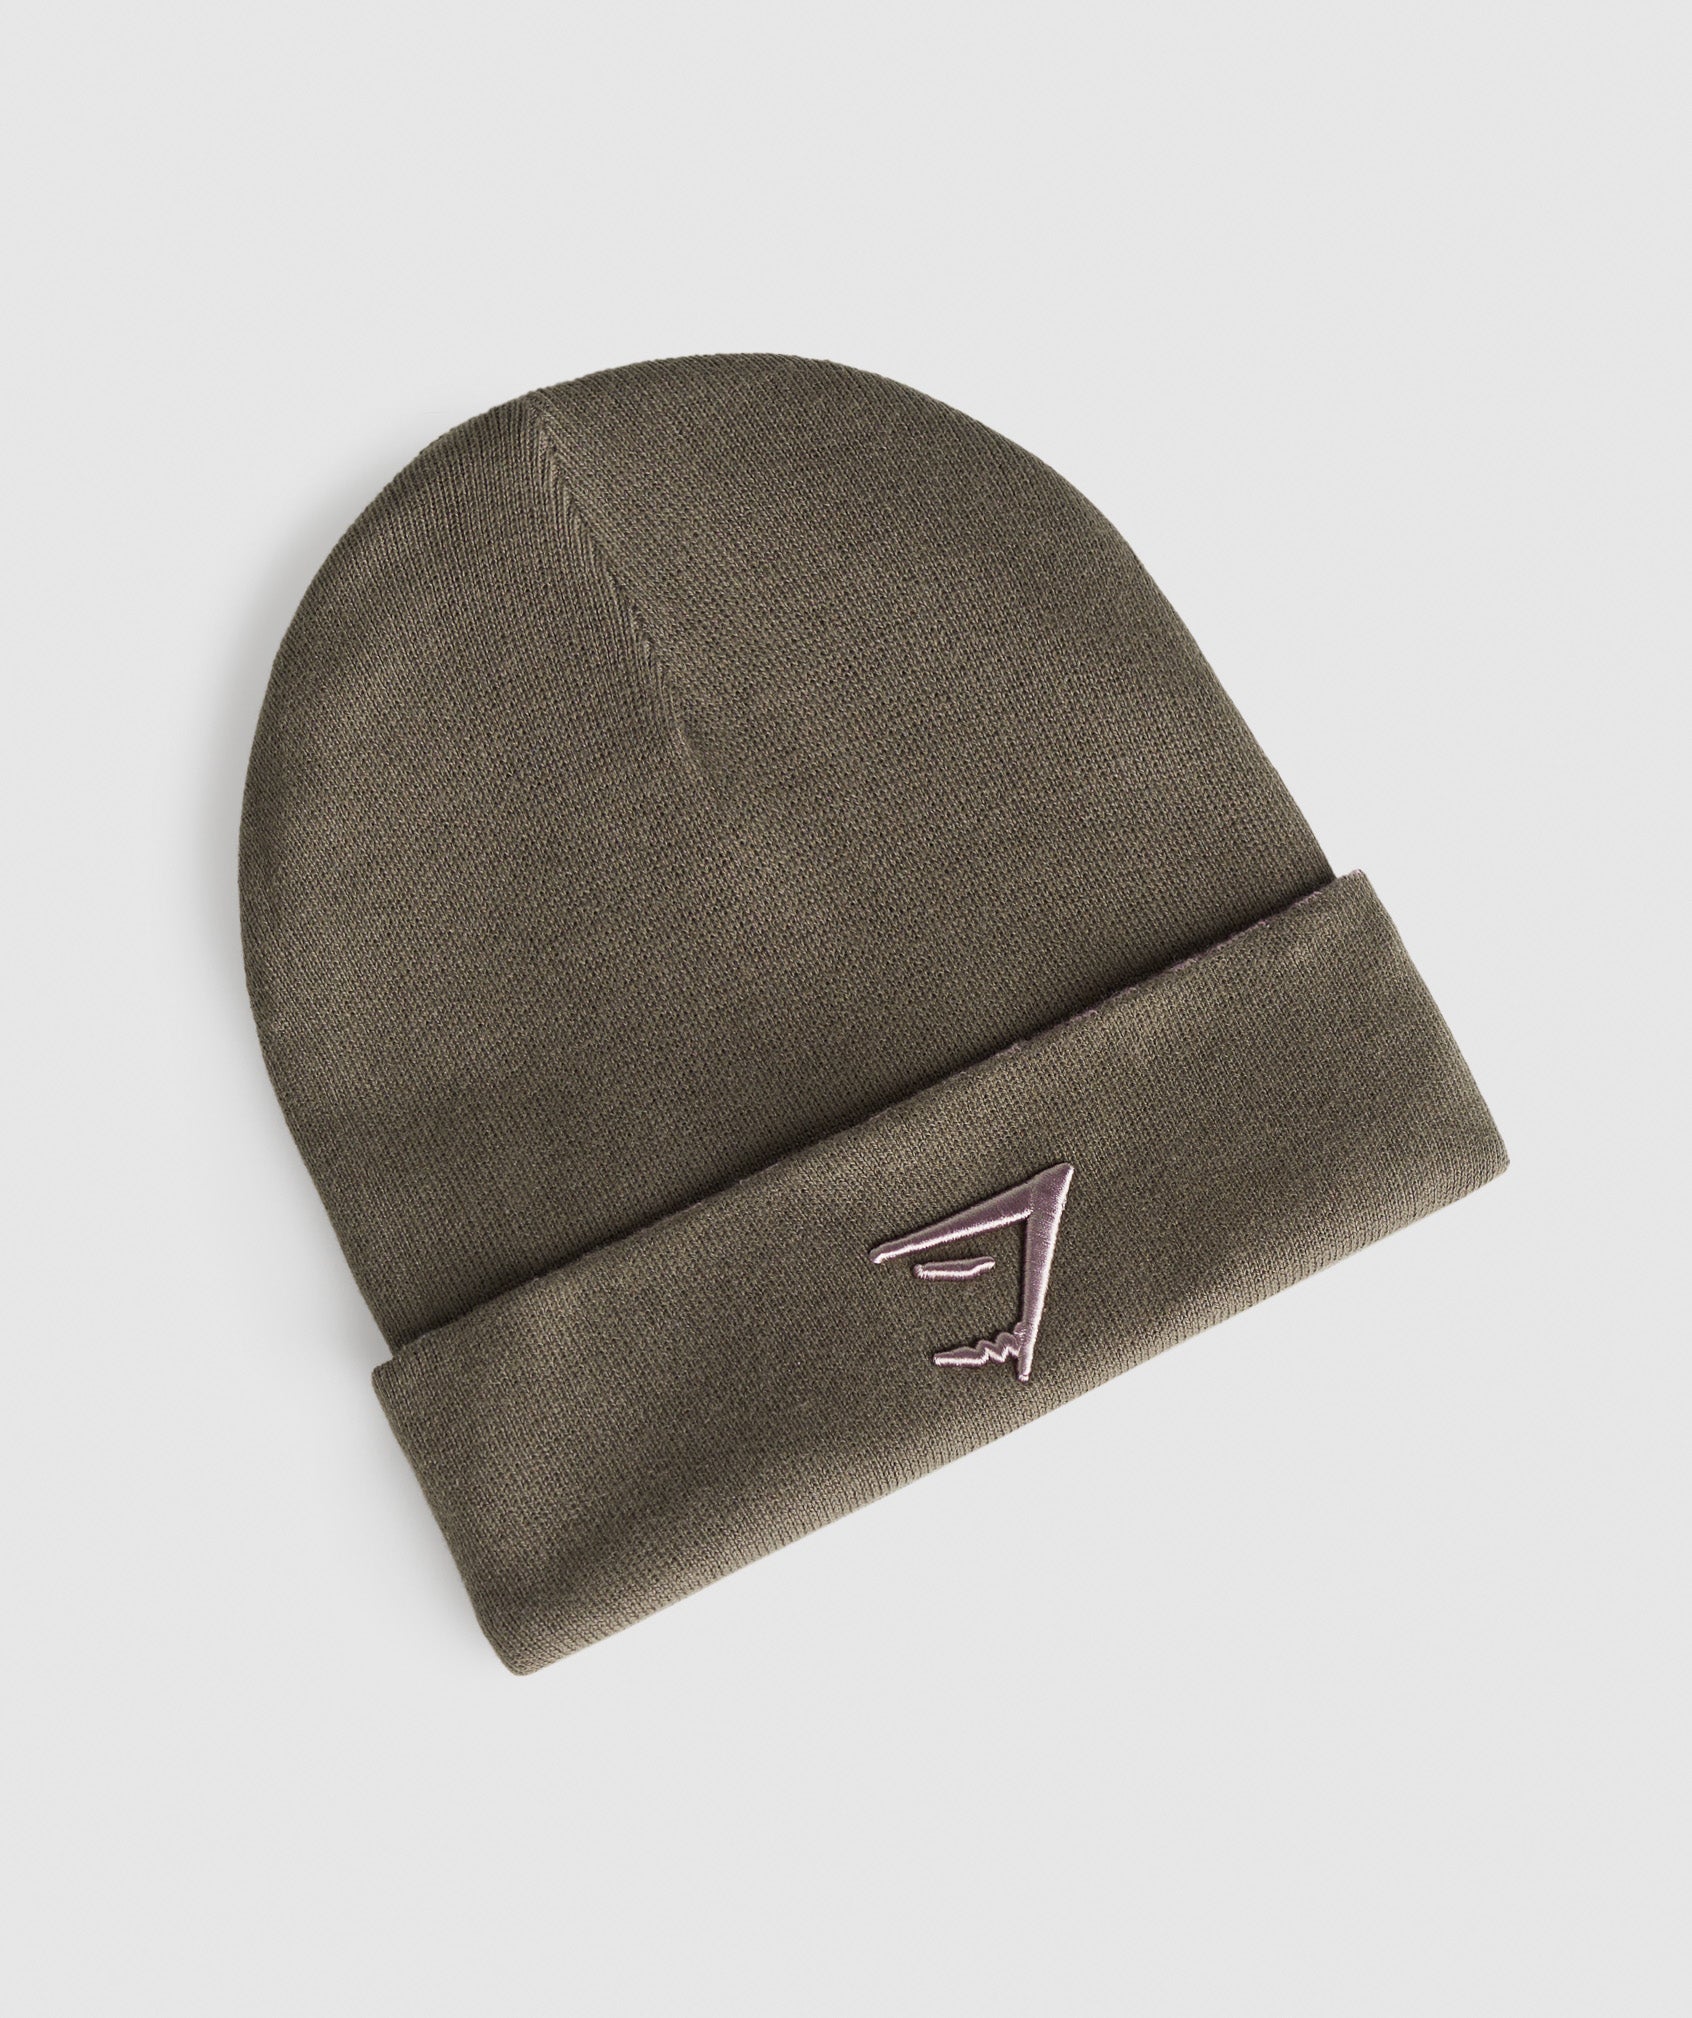 Reverse Jacquard Beanie in {{variantColor} is out of stock